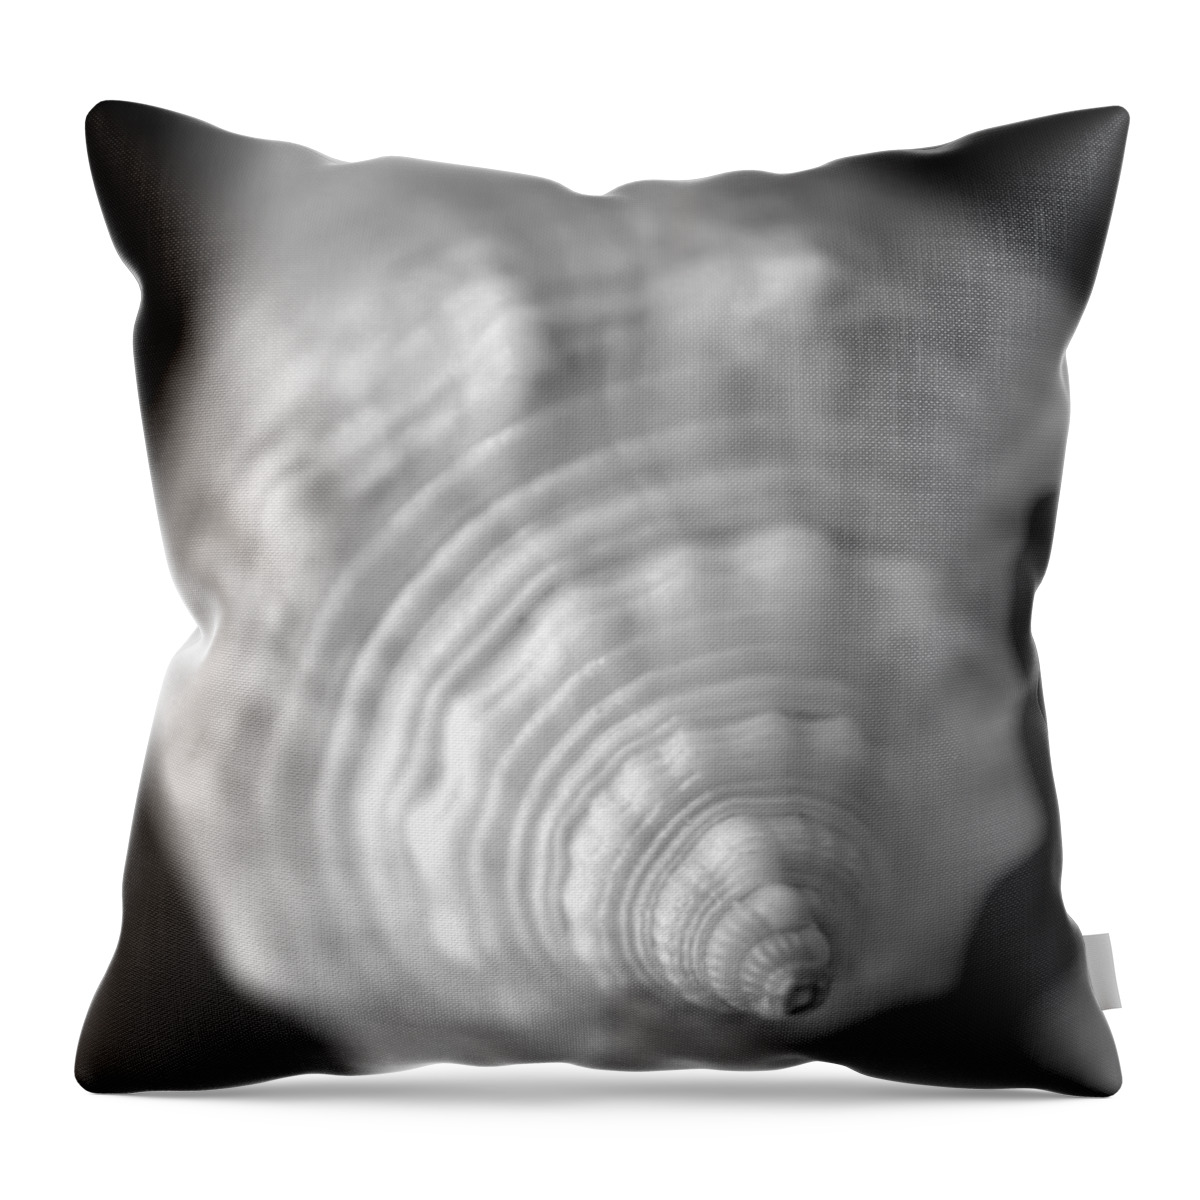 Black And White Throw Pillow featuring the photograph Shell Dream by Chris Scroggins